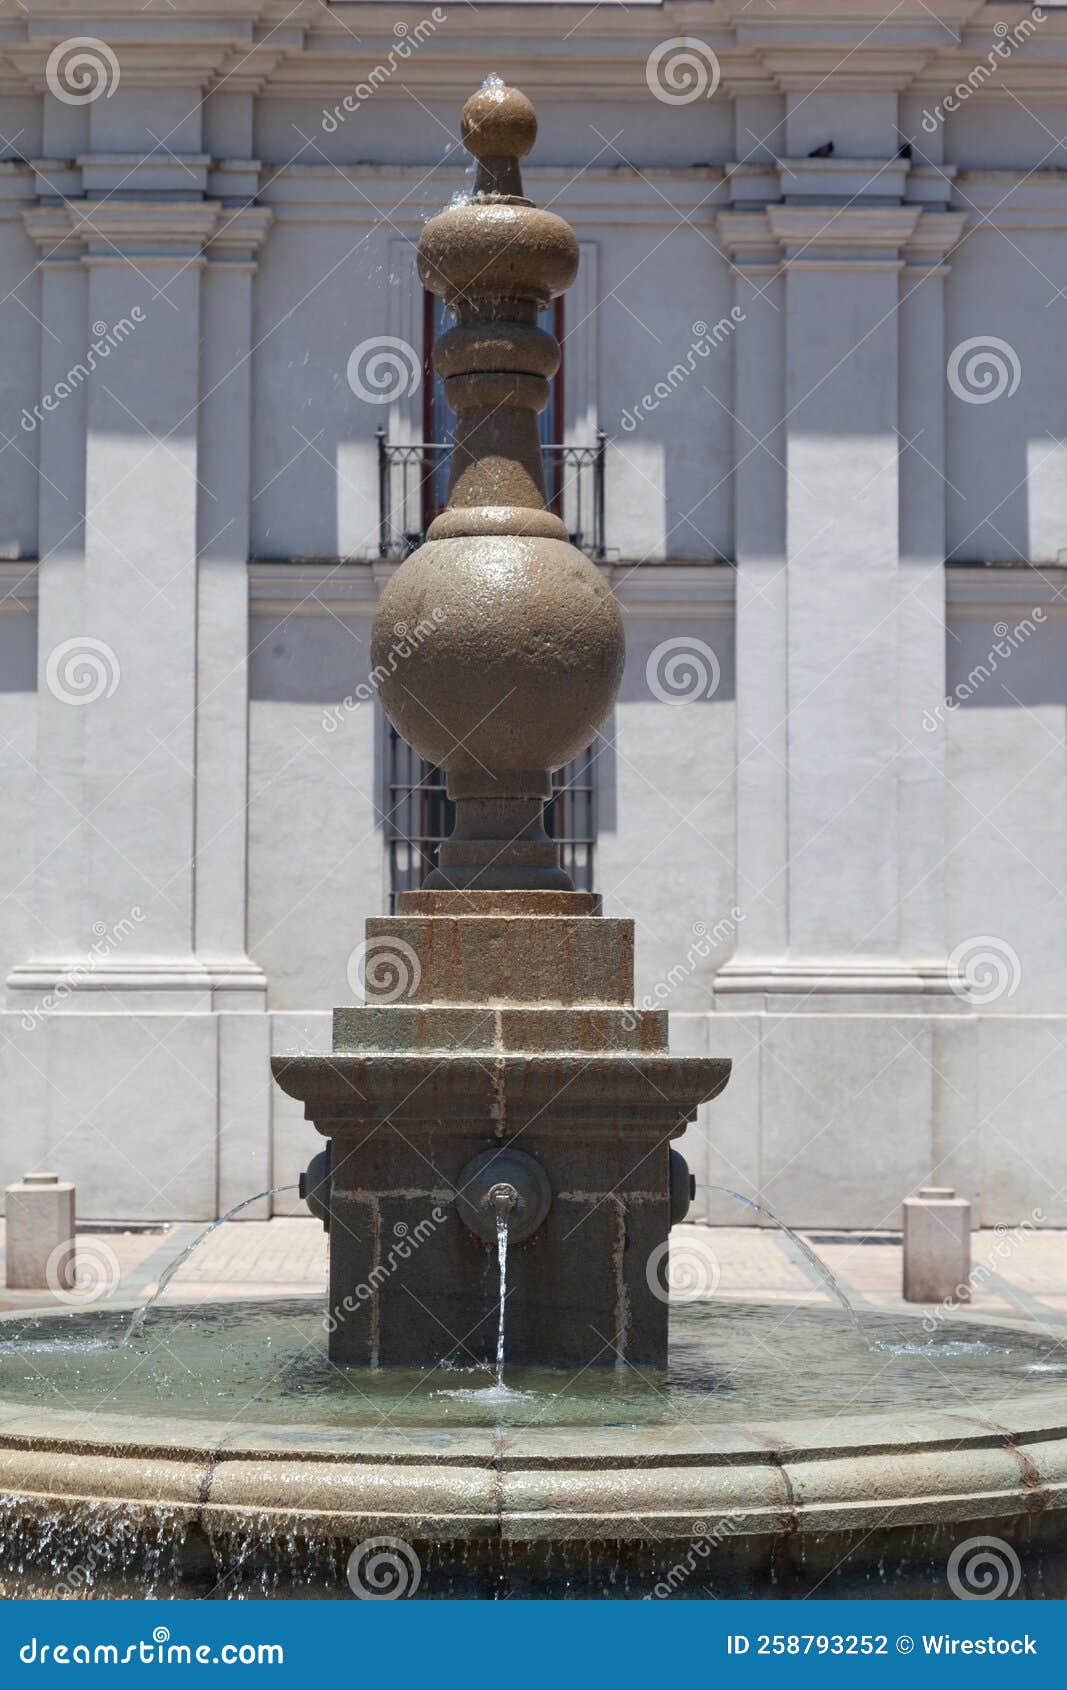 vertical view of a fountain in front of the la moneda palace in santiago, chile